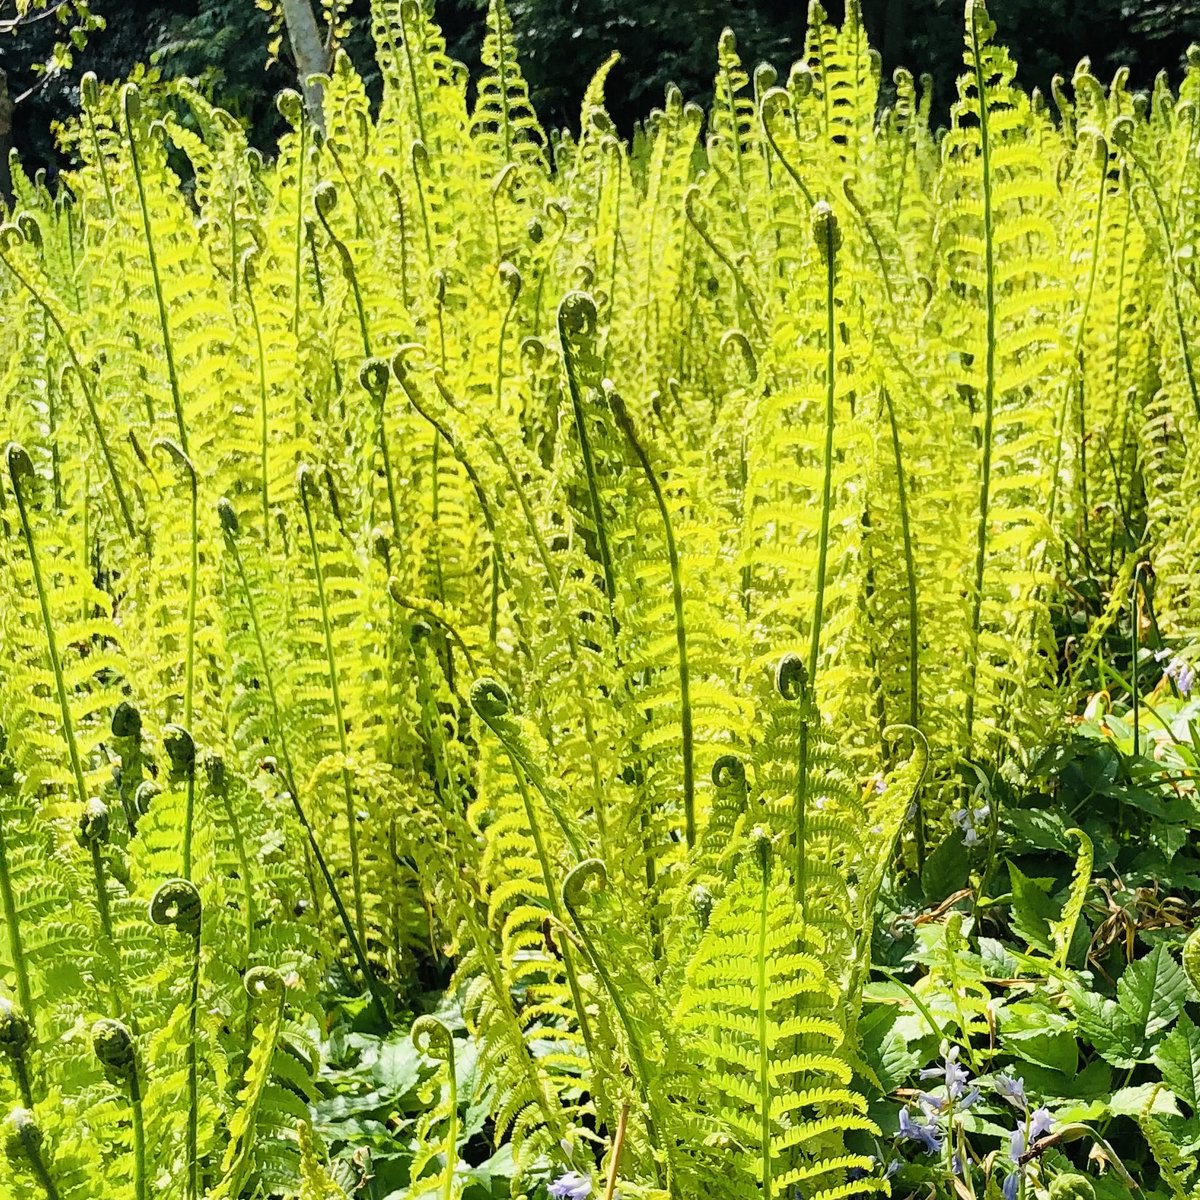 Ferns soaking up the sun ⁦@Dorothyclive⁩ 💚💚